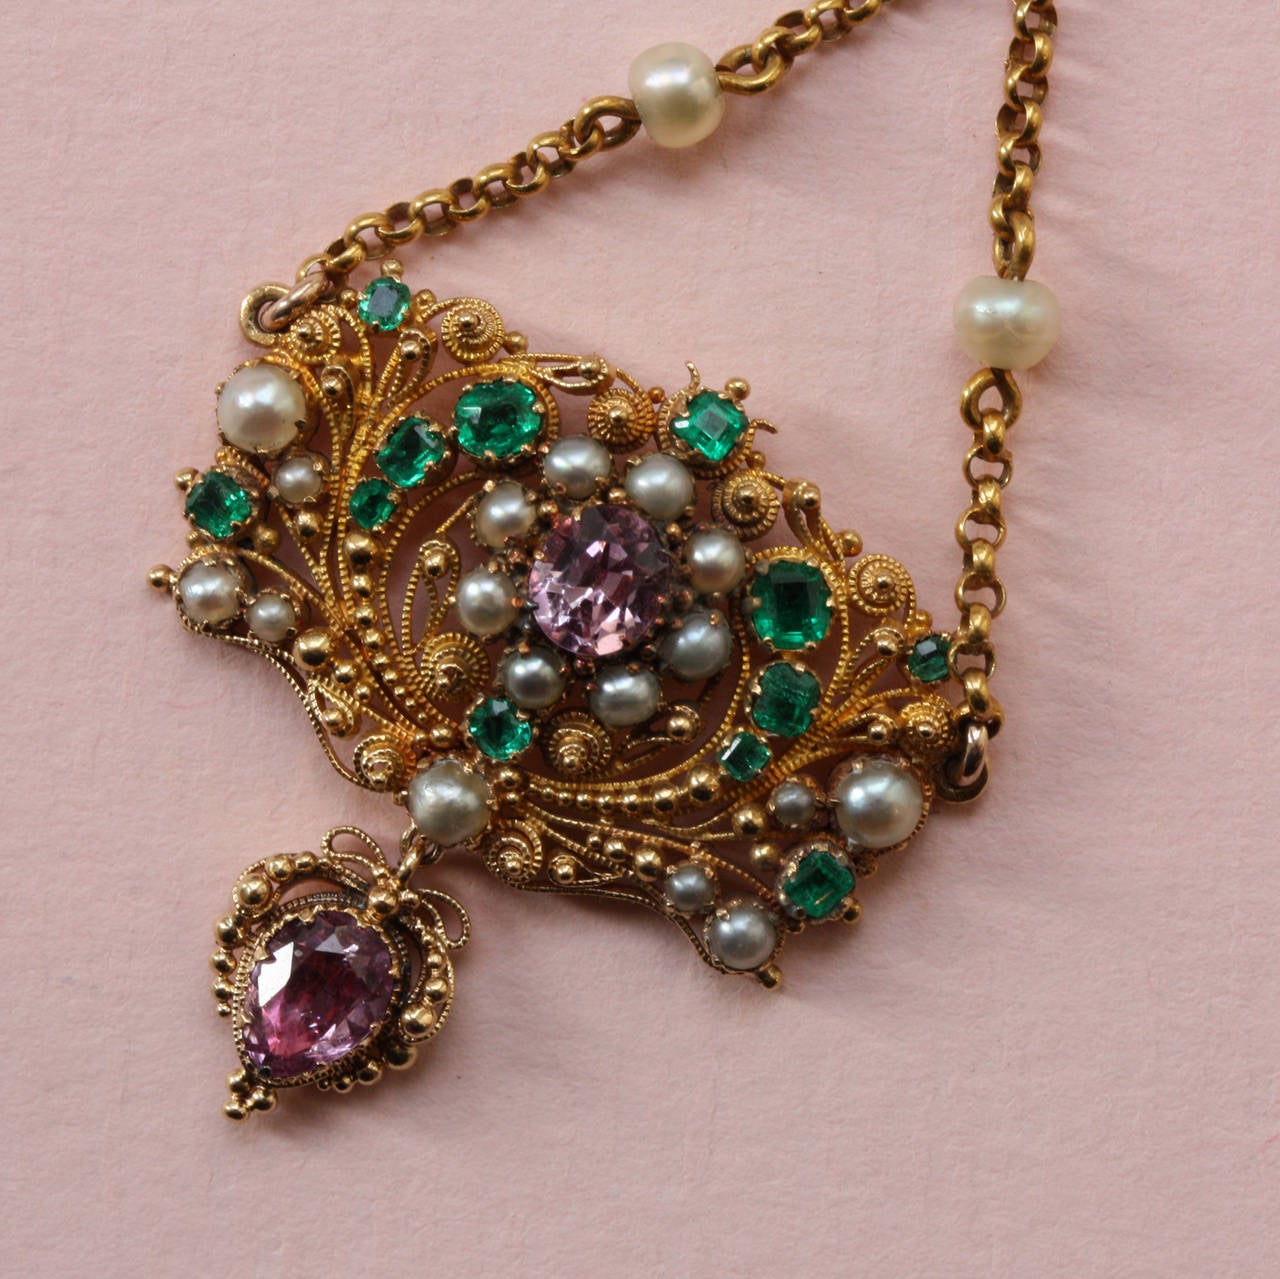 A 15 carat gold pendant decorated with fine filligree, granulations set with 12 emeralds, 19 natural pearls and 2 pink topazes, suspending from a chain.
England, circa 1820.

weight: 5.8 grams
dimensions: 5.8 x 3 cm.